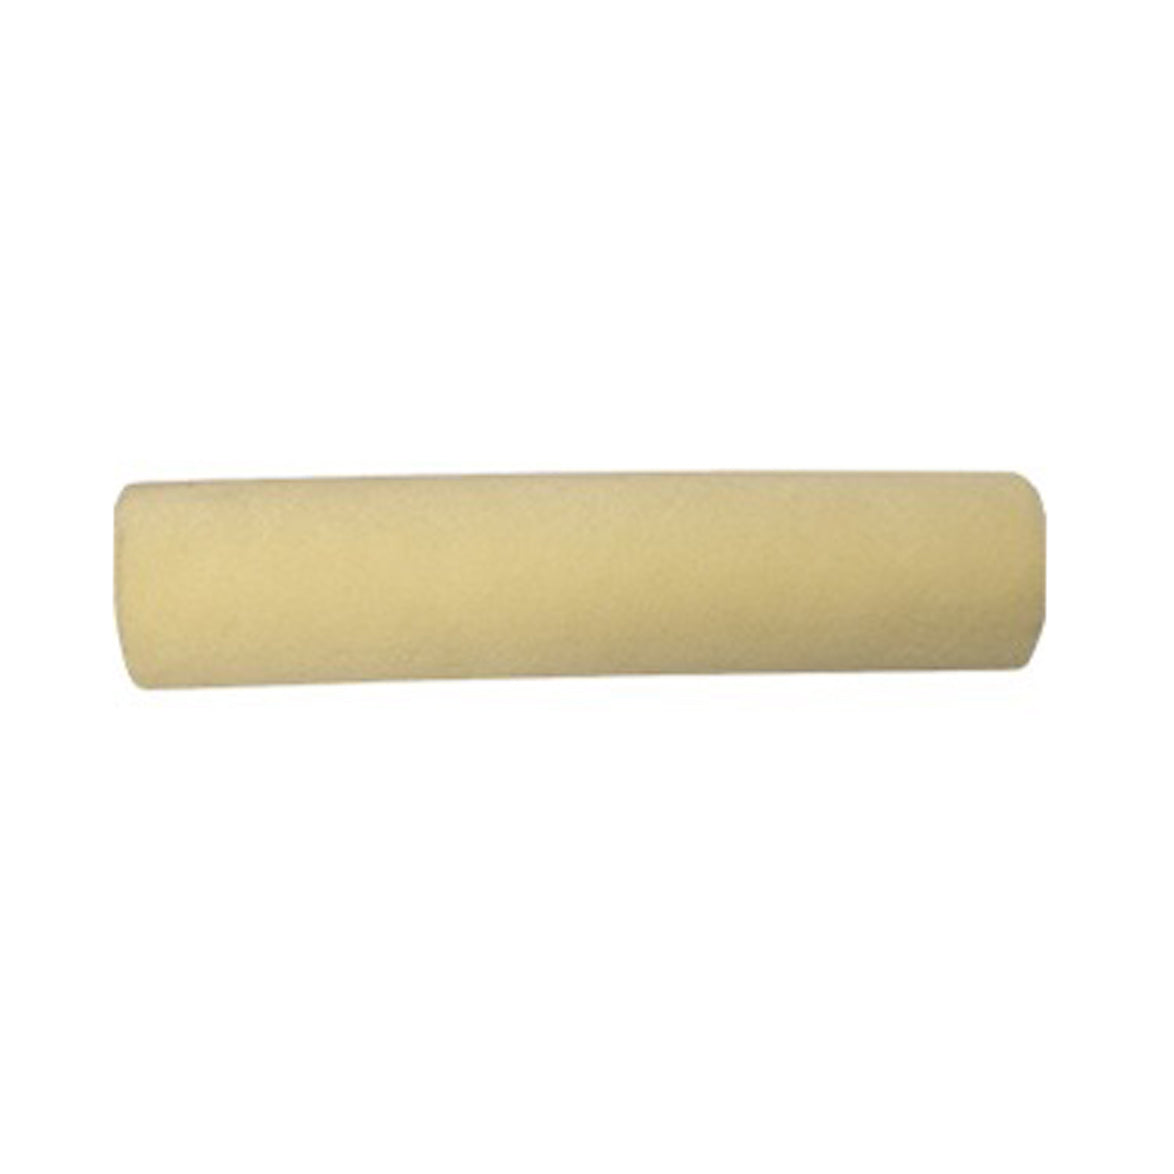 Dynamic mohair 9" x 3/16" roller cover, available at Clement's Paint in Austin, TX.